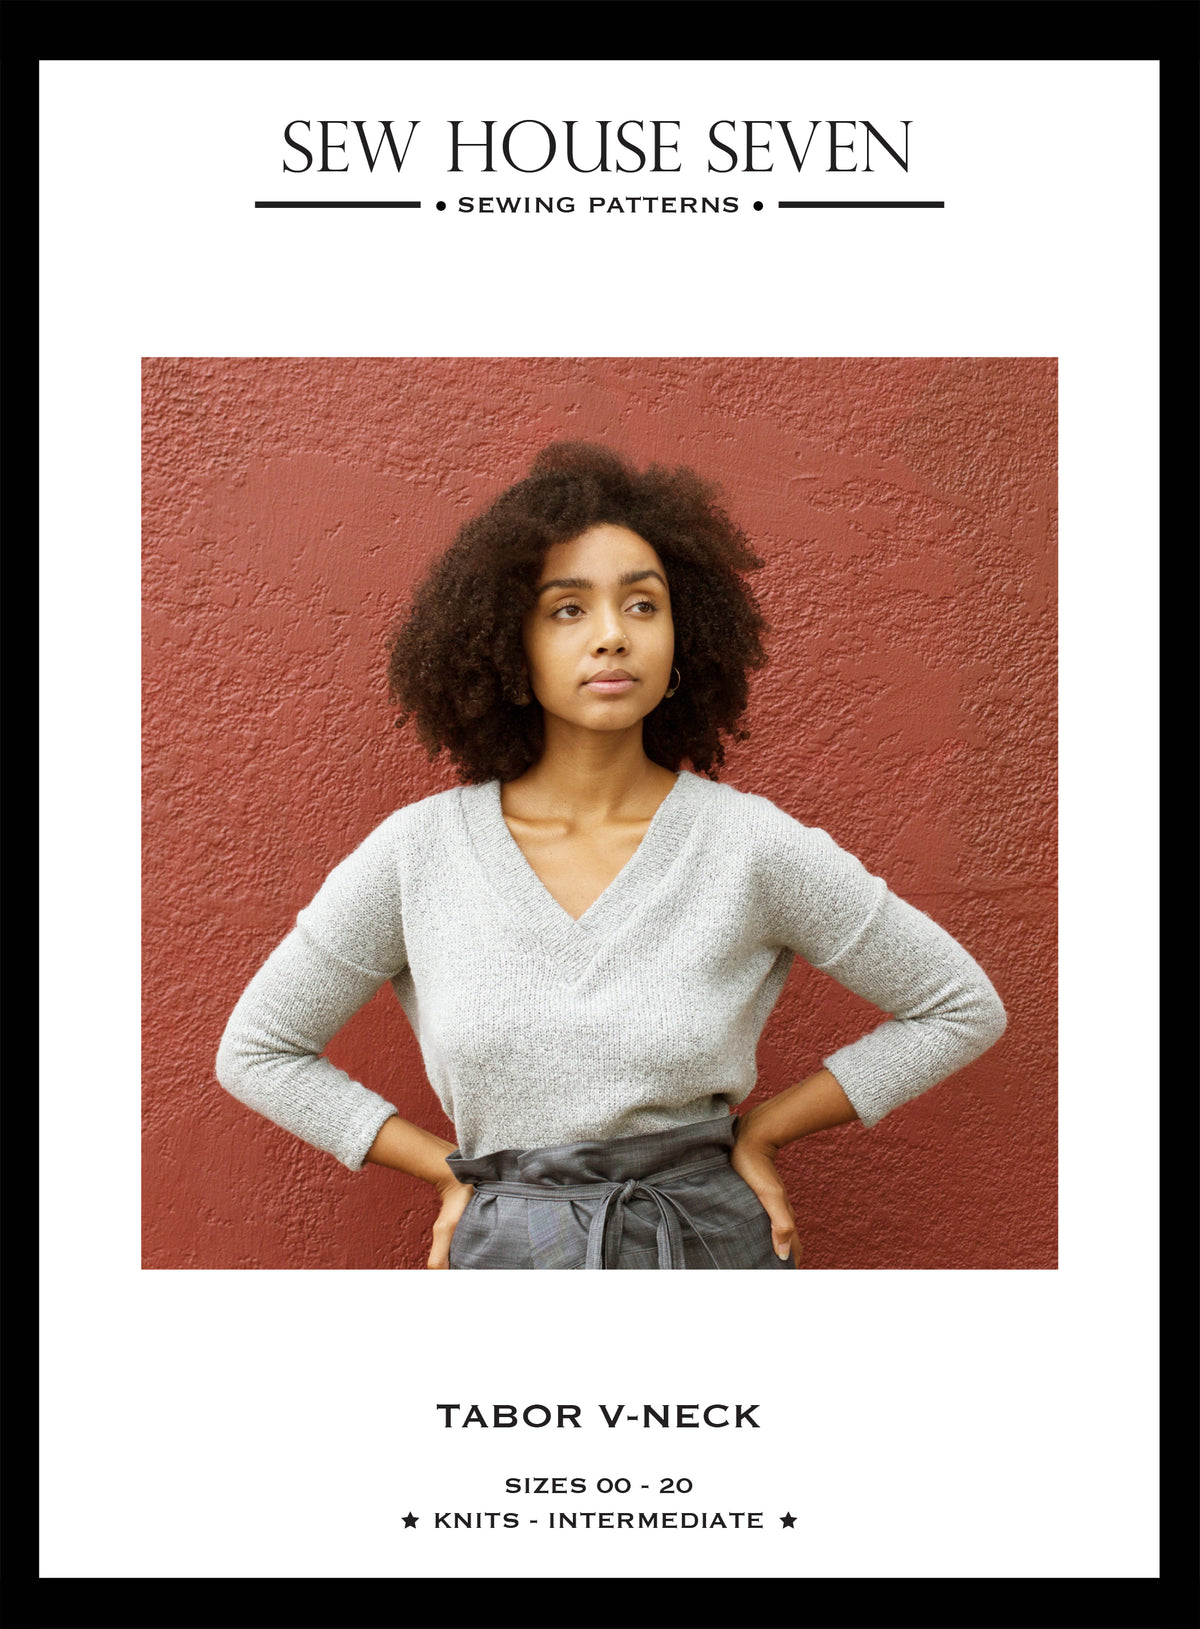 Tabor V-neck - Sewing Pattern | Sew House 7